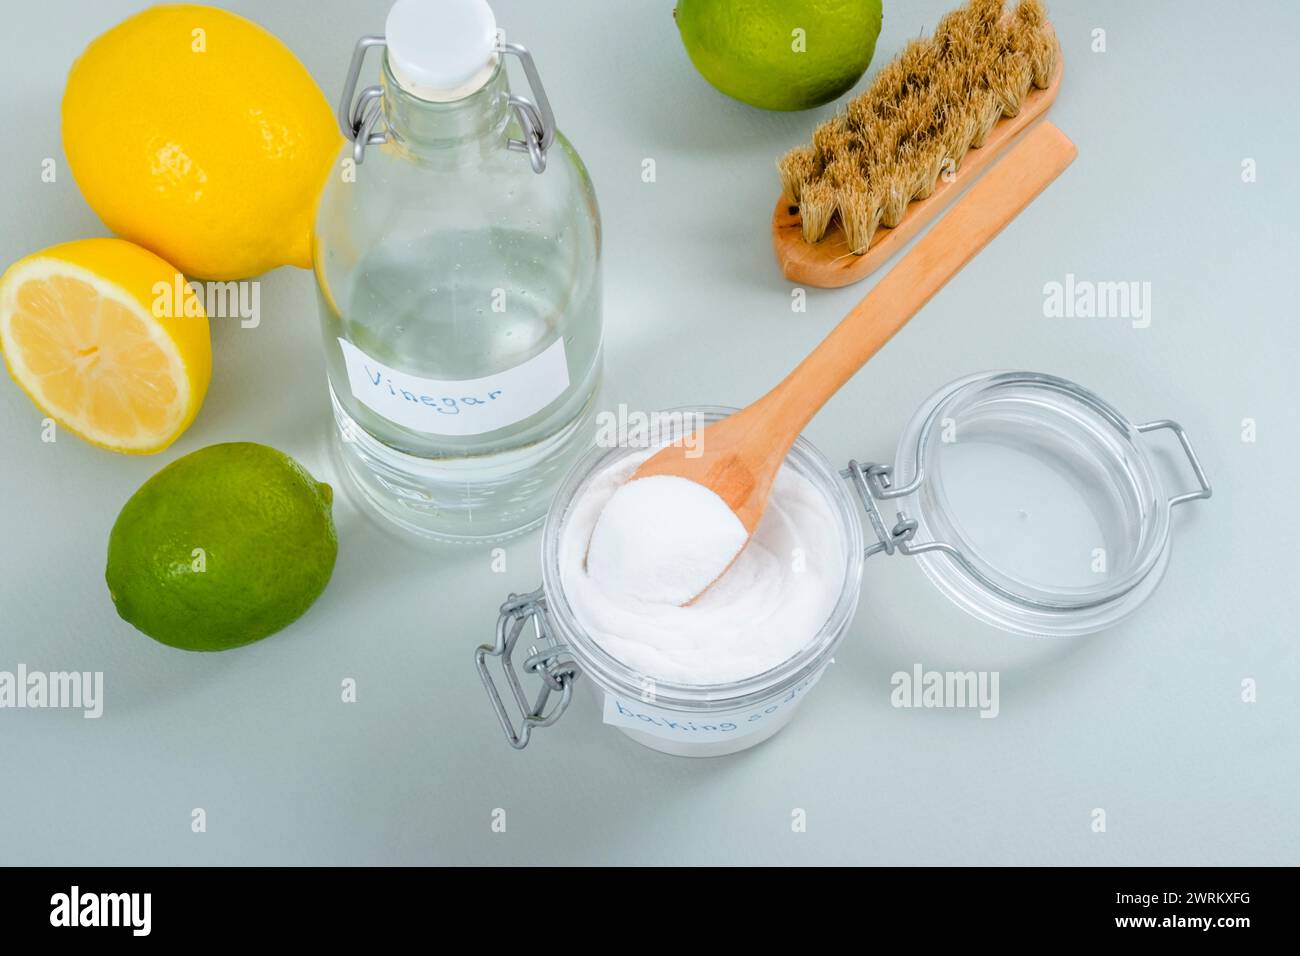 Natural household cleaning products baking soda, white vinegar, citrus fruit, brush on a gray background. Stock Photo